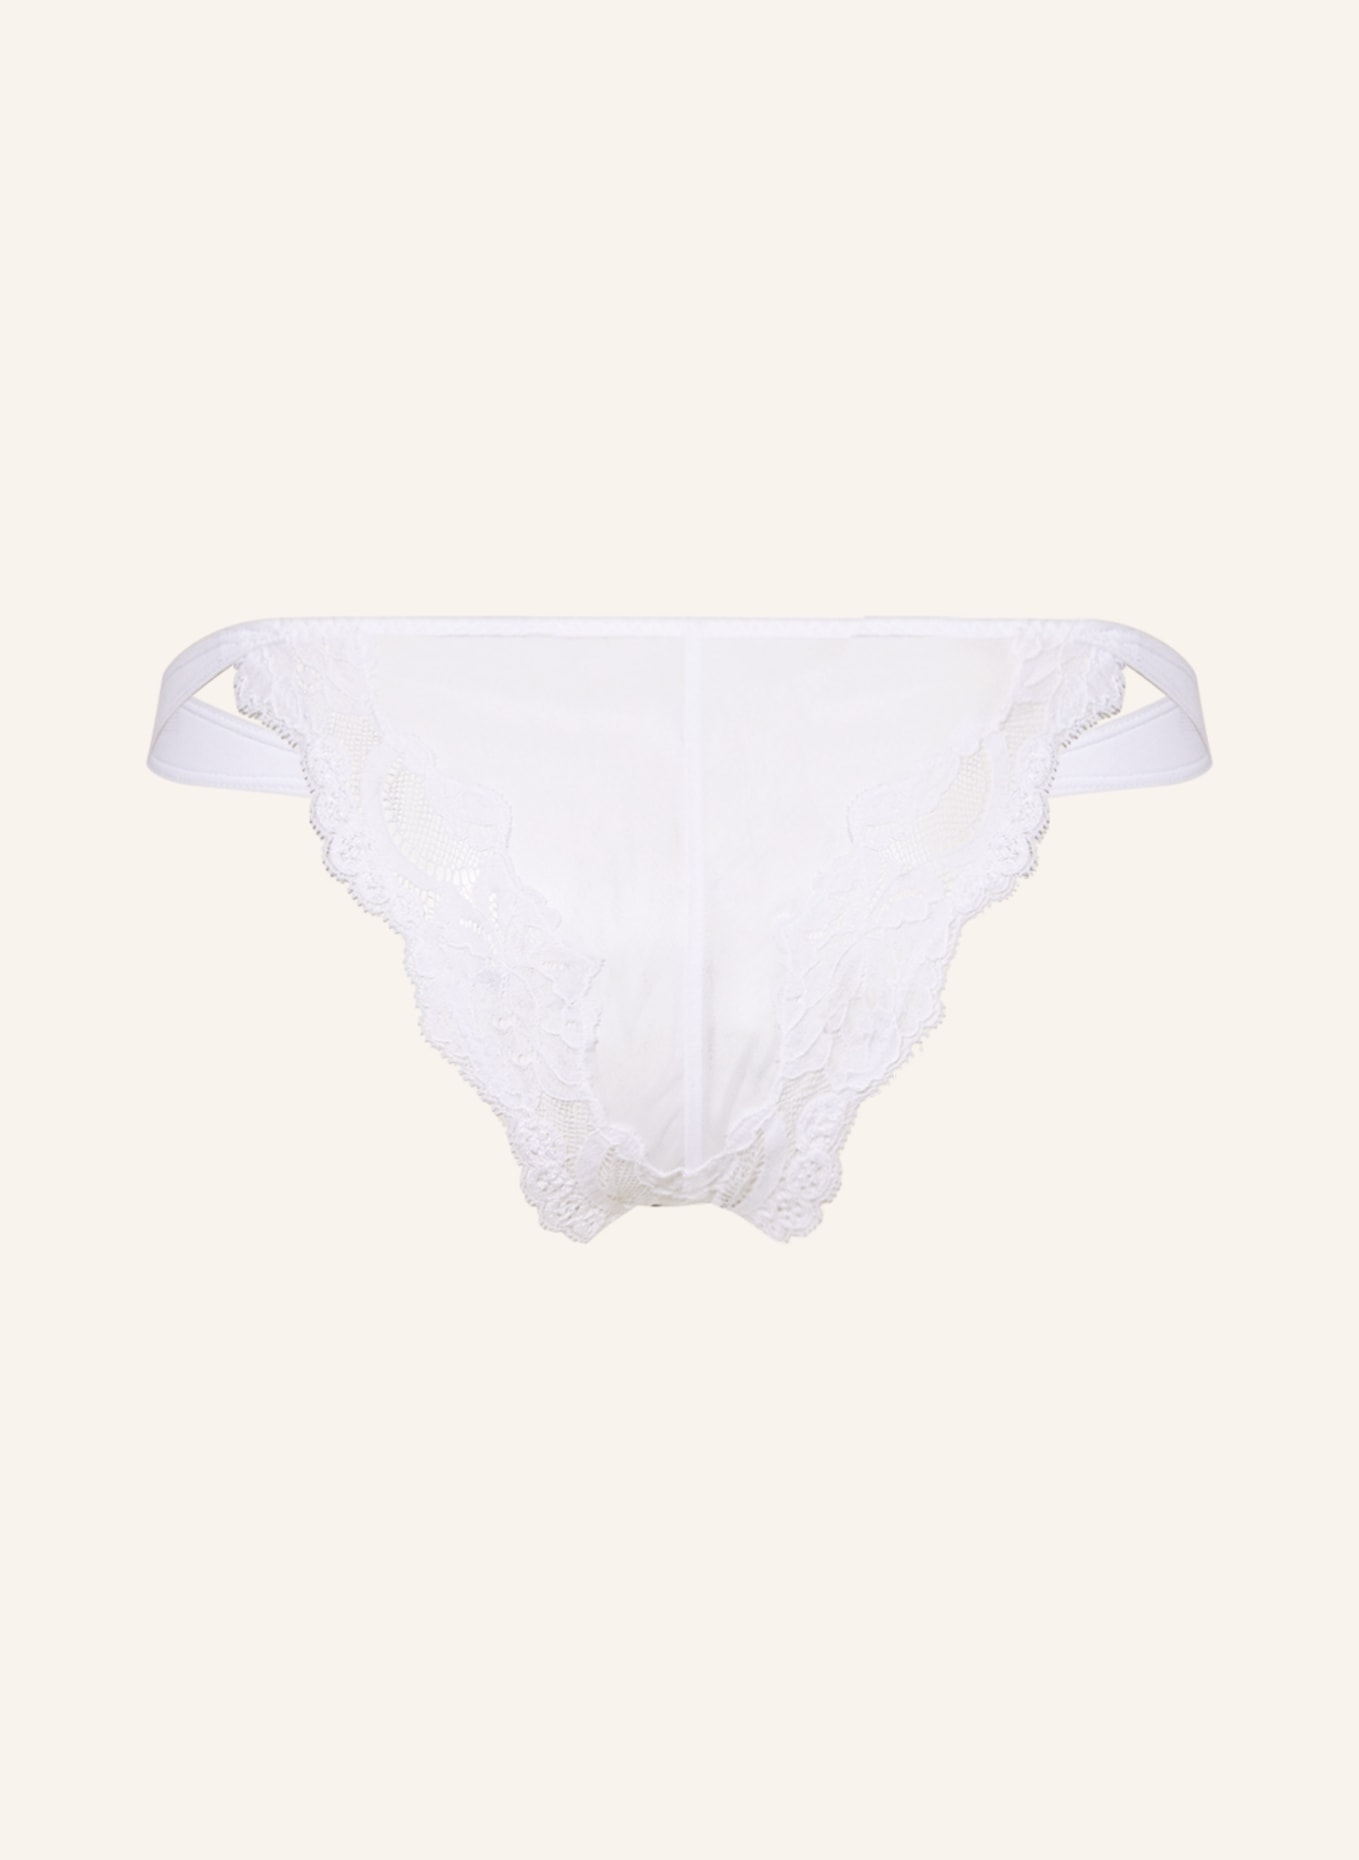 ANDRES SARDA Briefs DION, Color: WHITE (Image 2)